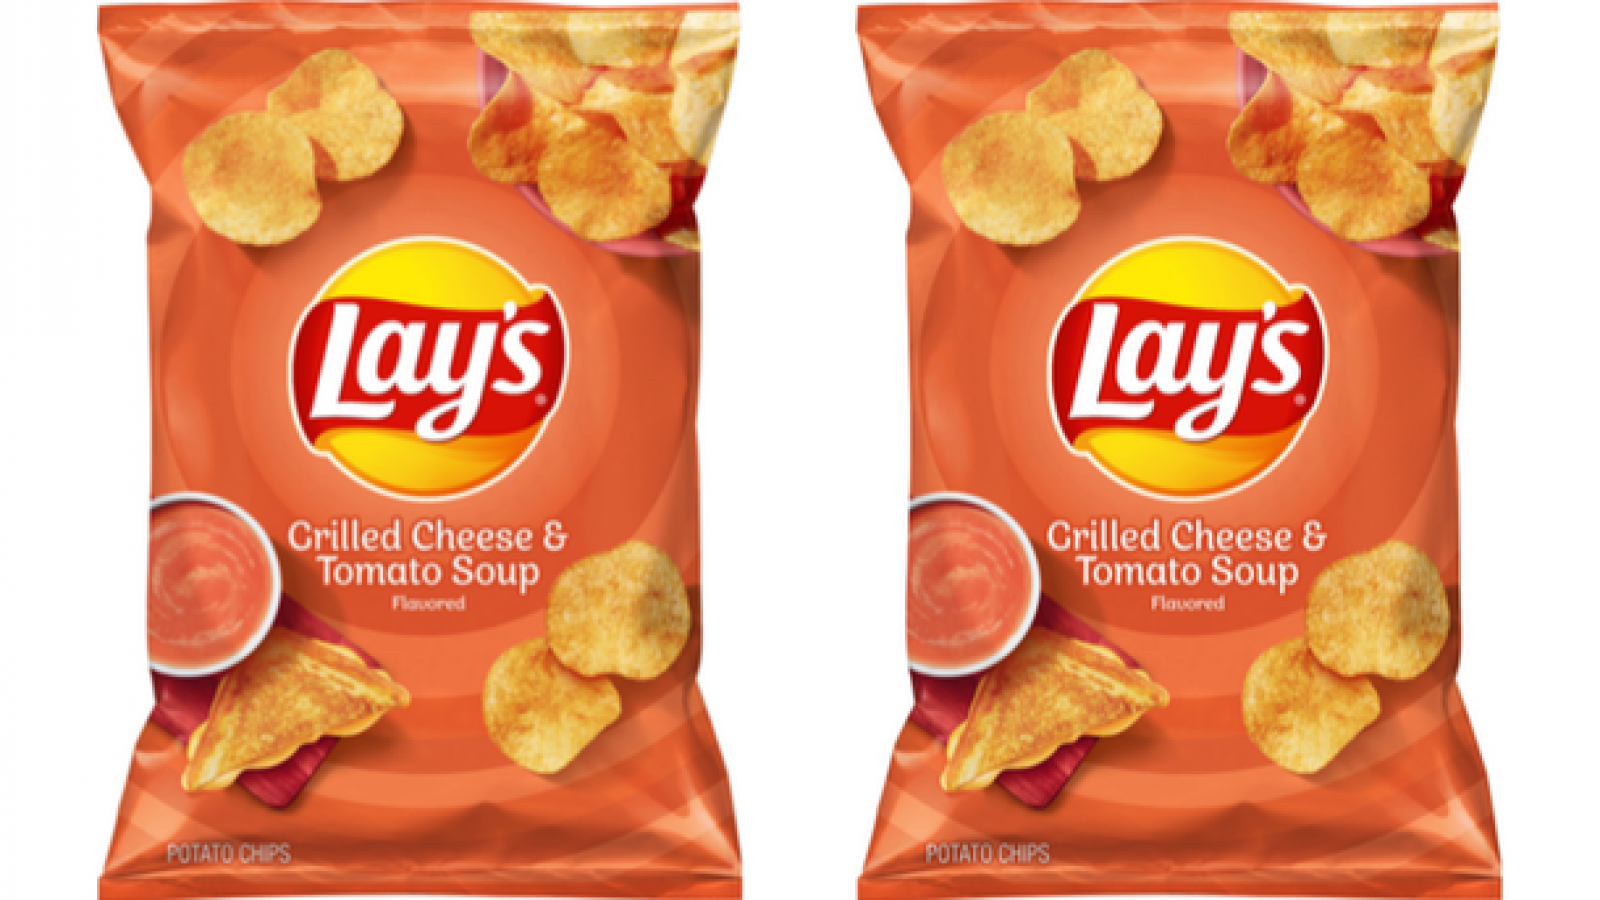 Lays Grilled Cheese and Tomato Soup Chips and Other New Flavors for 2019: Launch Date and Where to Buy